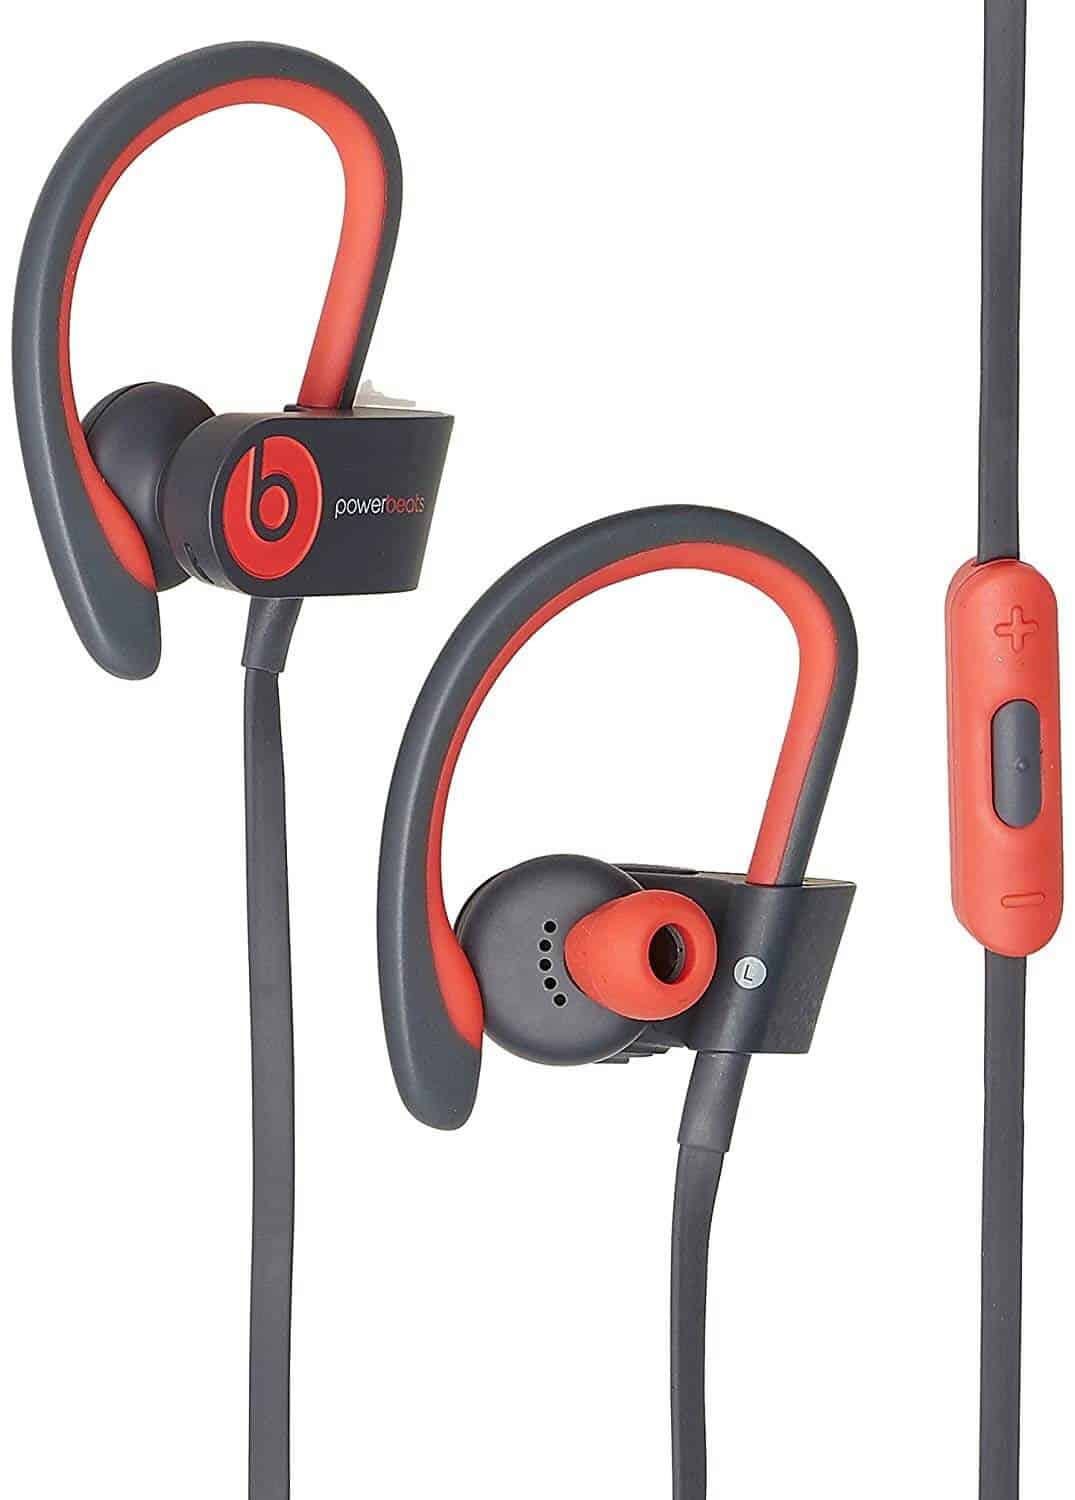 Difference Between Powerbeats 2 and 